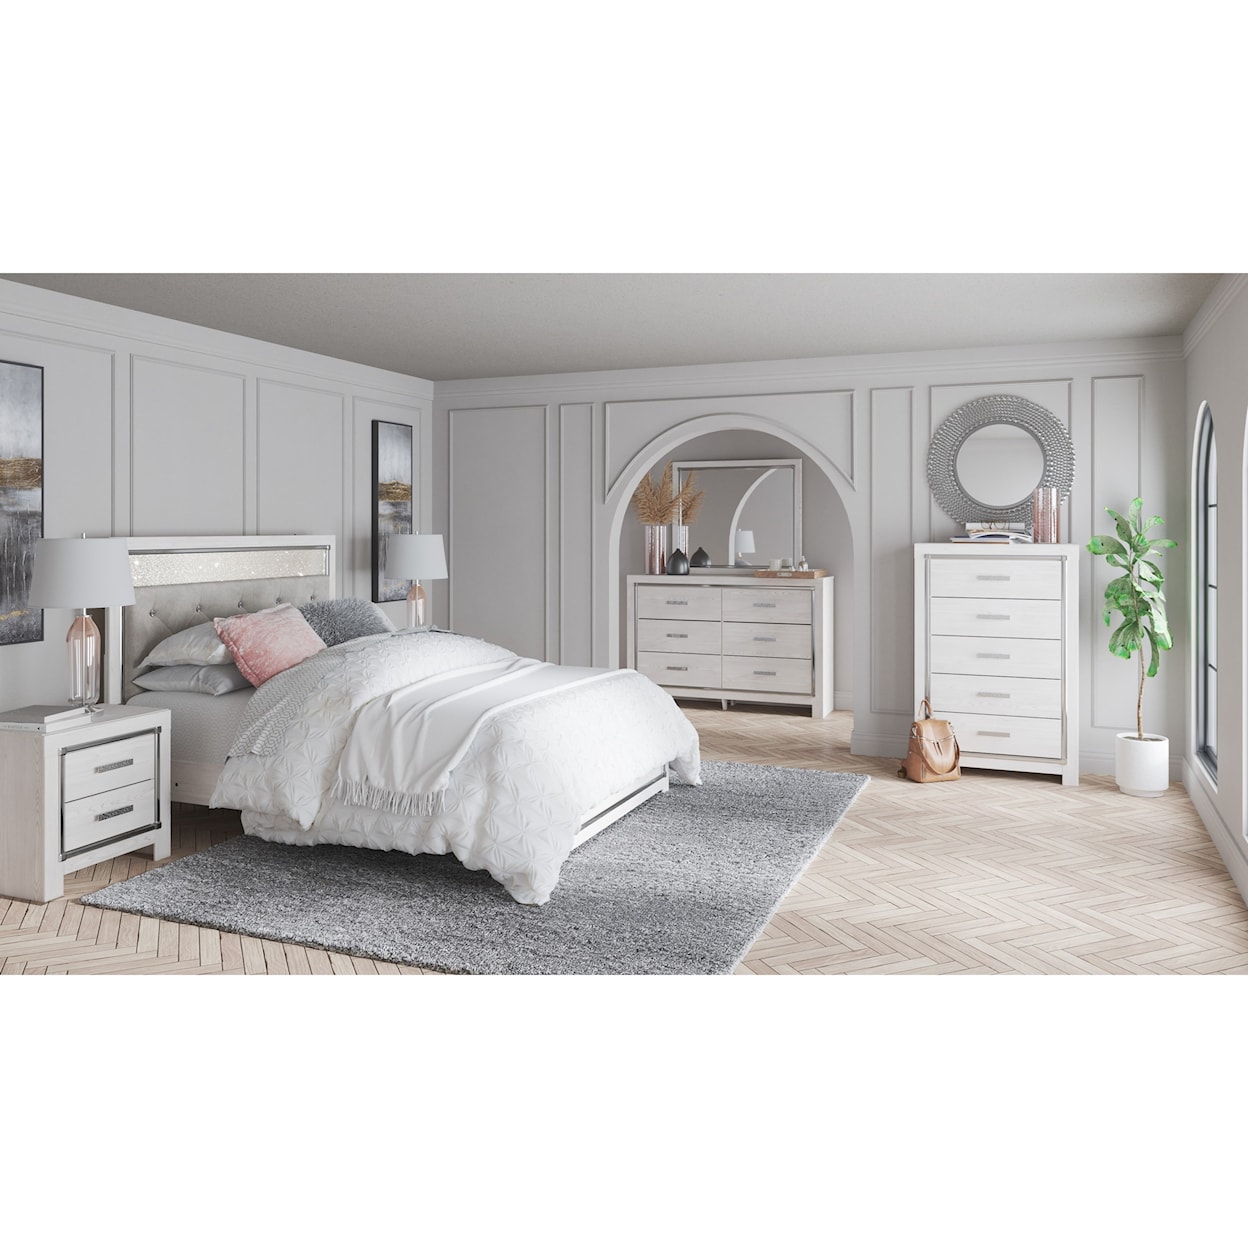 Ashley Signature Design Altyra Queen Upholstered Panel Bed